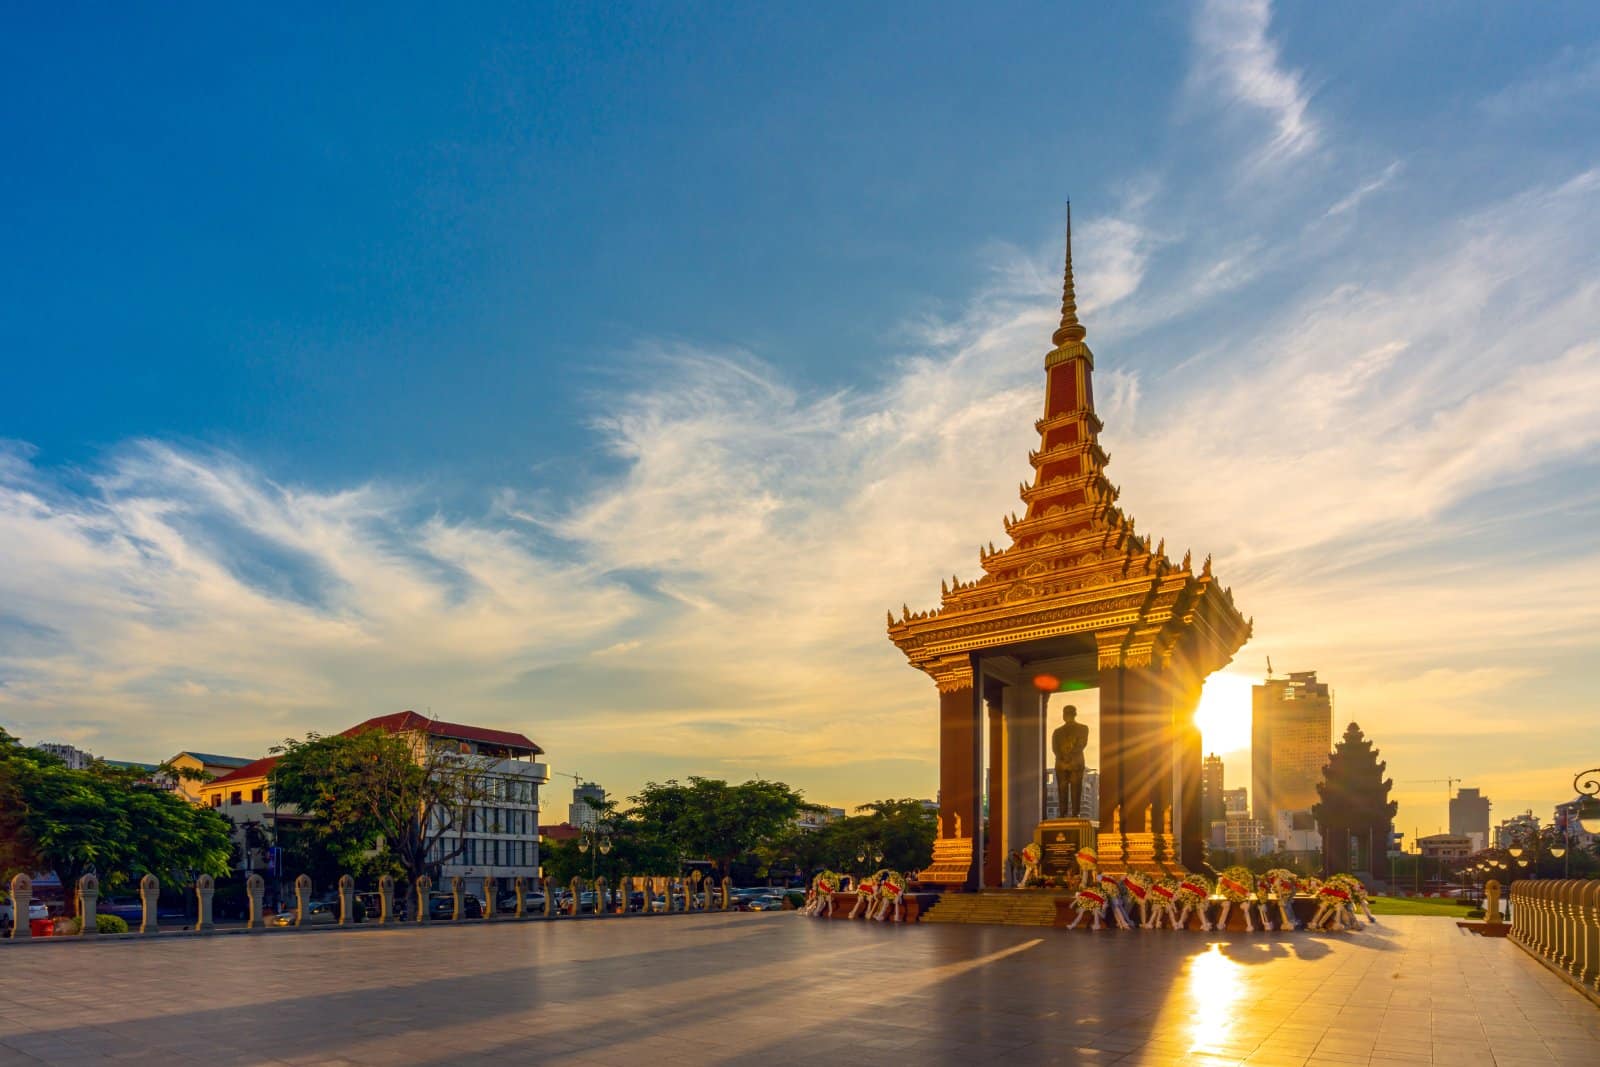 <p class="wp-caption-text">Image Credit: Shutterstock / Chay_Tee</p>  <p><span>Phnom Penh, the capital city of Cambodia, is a vibrant and bustling metropolis that sits at the confluence of the Mekong and Tonle Sap rivers. This city blends traditional Khmer culture and French colonial heritage, evident in its architecture, cuisine, and urban layout. Phnom Penh’s rich history is both inspiring and poignant, with landmarks such as the Royal Palace, Silver Pagoda, and the National Museum offering insights into the splendor of ancient Cambodia. Meanwhile, sites like the Tuol Sleng Genocide Museum and the Killing Fields of Choeung Ek provide a sobering look at the country’s more recent past. The city is also known for its lively markets, including the Central and Russian markets, where visitors can find everything from local handicrafts to delicious street food. Phnom Penh’s development as a tourist destination has not diminished its charm and resilience, with the city offering a warm welcome to visitors from around the world.</span></p> <p><b>Insider’s Tip:</b><span> For an authentic experience, take a boat trip at sunset along the Mekong River. This provides a unique perspective of the city and offers a moment of tranquility amidst the hustle and bustle of urban life.</span></p> <p><b>When to Travel:</b><span> November to February for the dry season.</span></p> <p><b>How to Get There:</b><span> Phnom Penh International Airport (PNH) offers direct flights from major cities in Asia and connecting flights globally.</span></p>